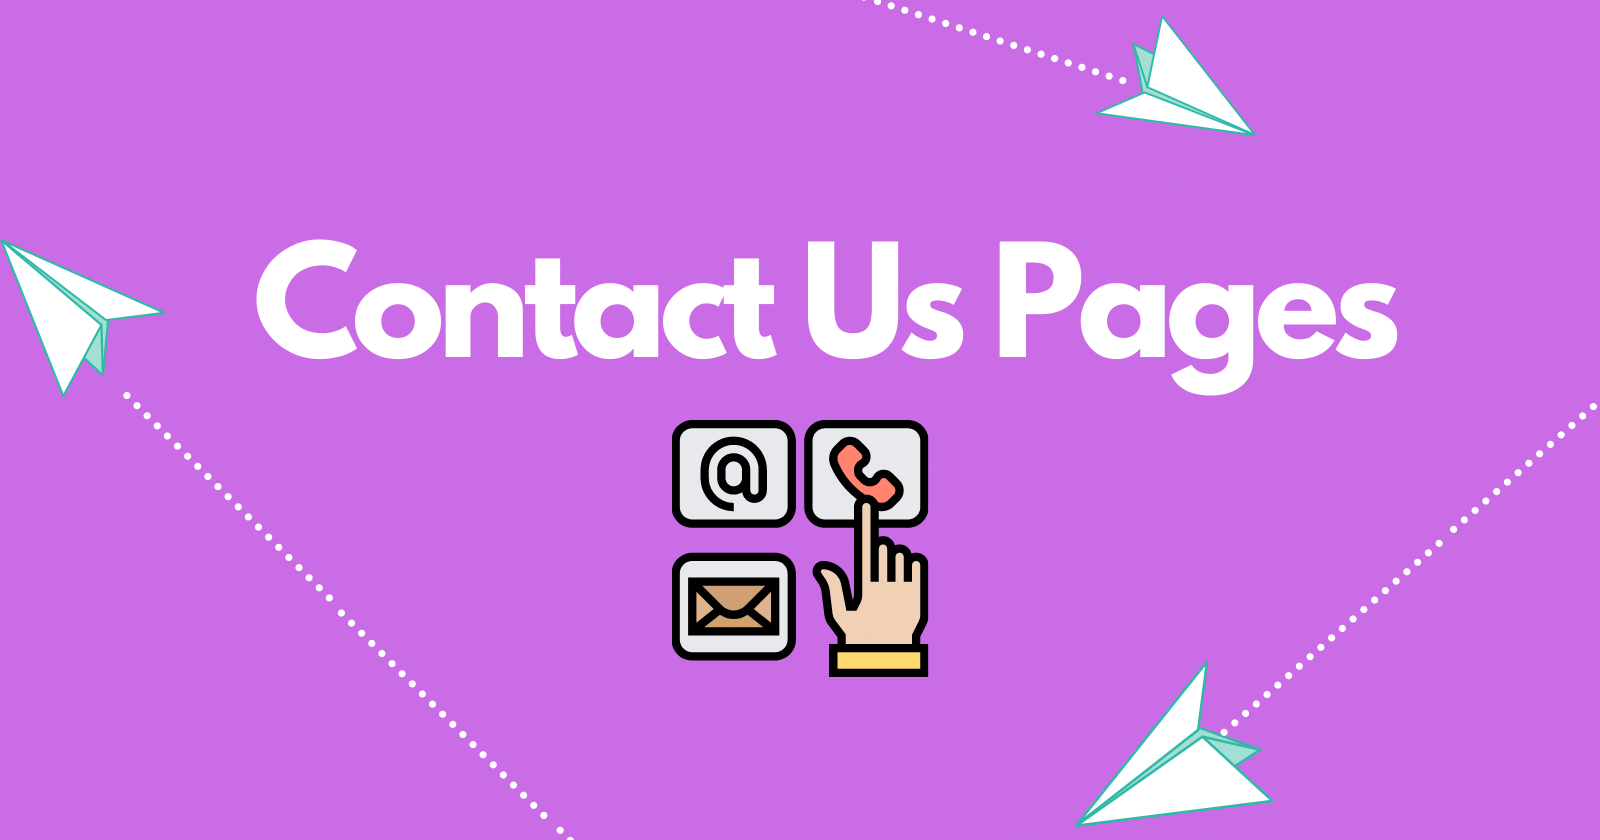 39 Inspiring Examples of Contact Us Pages